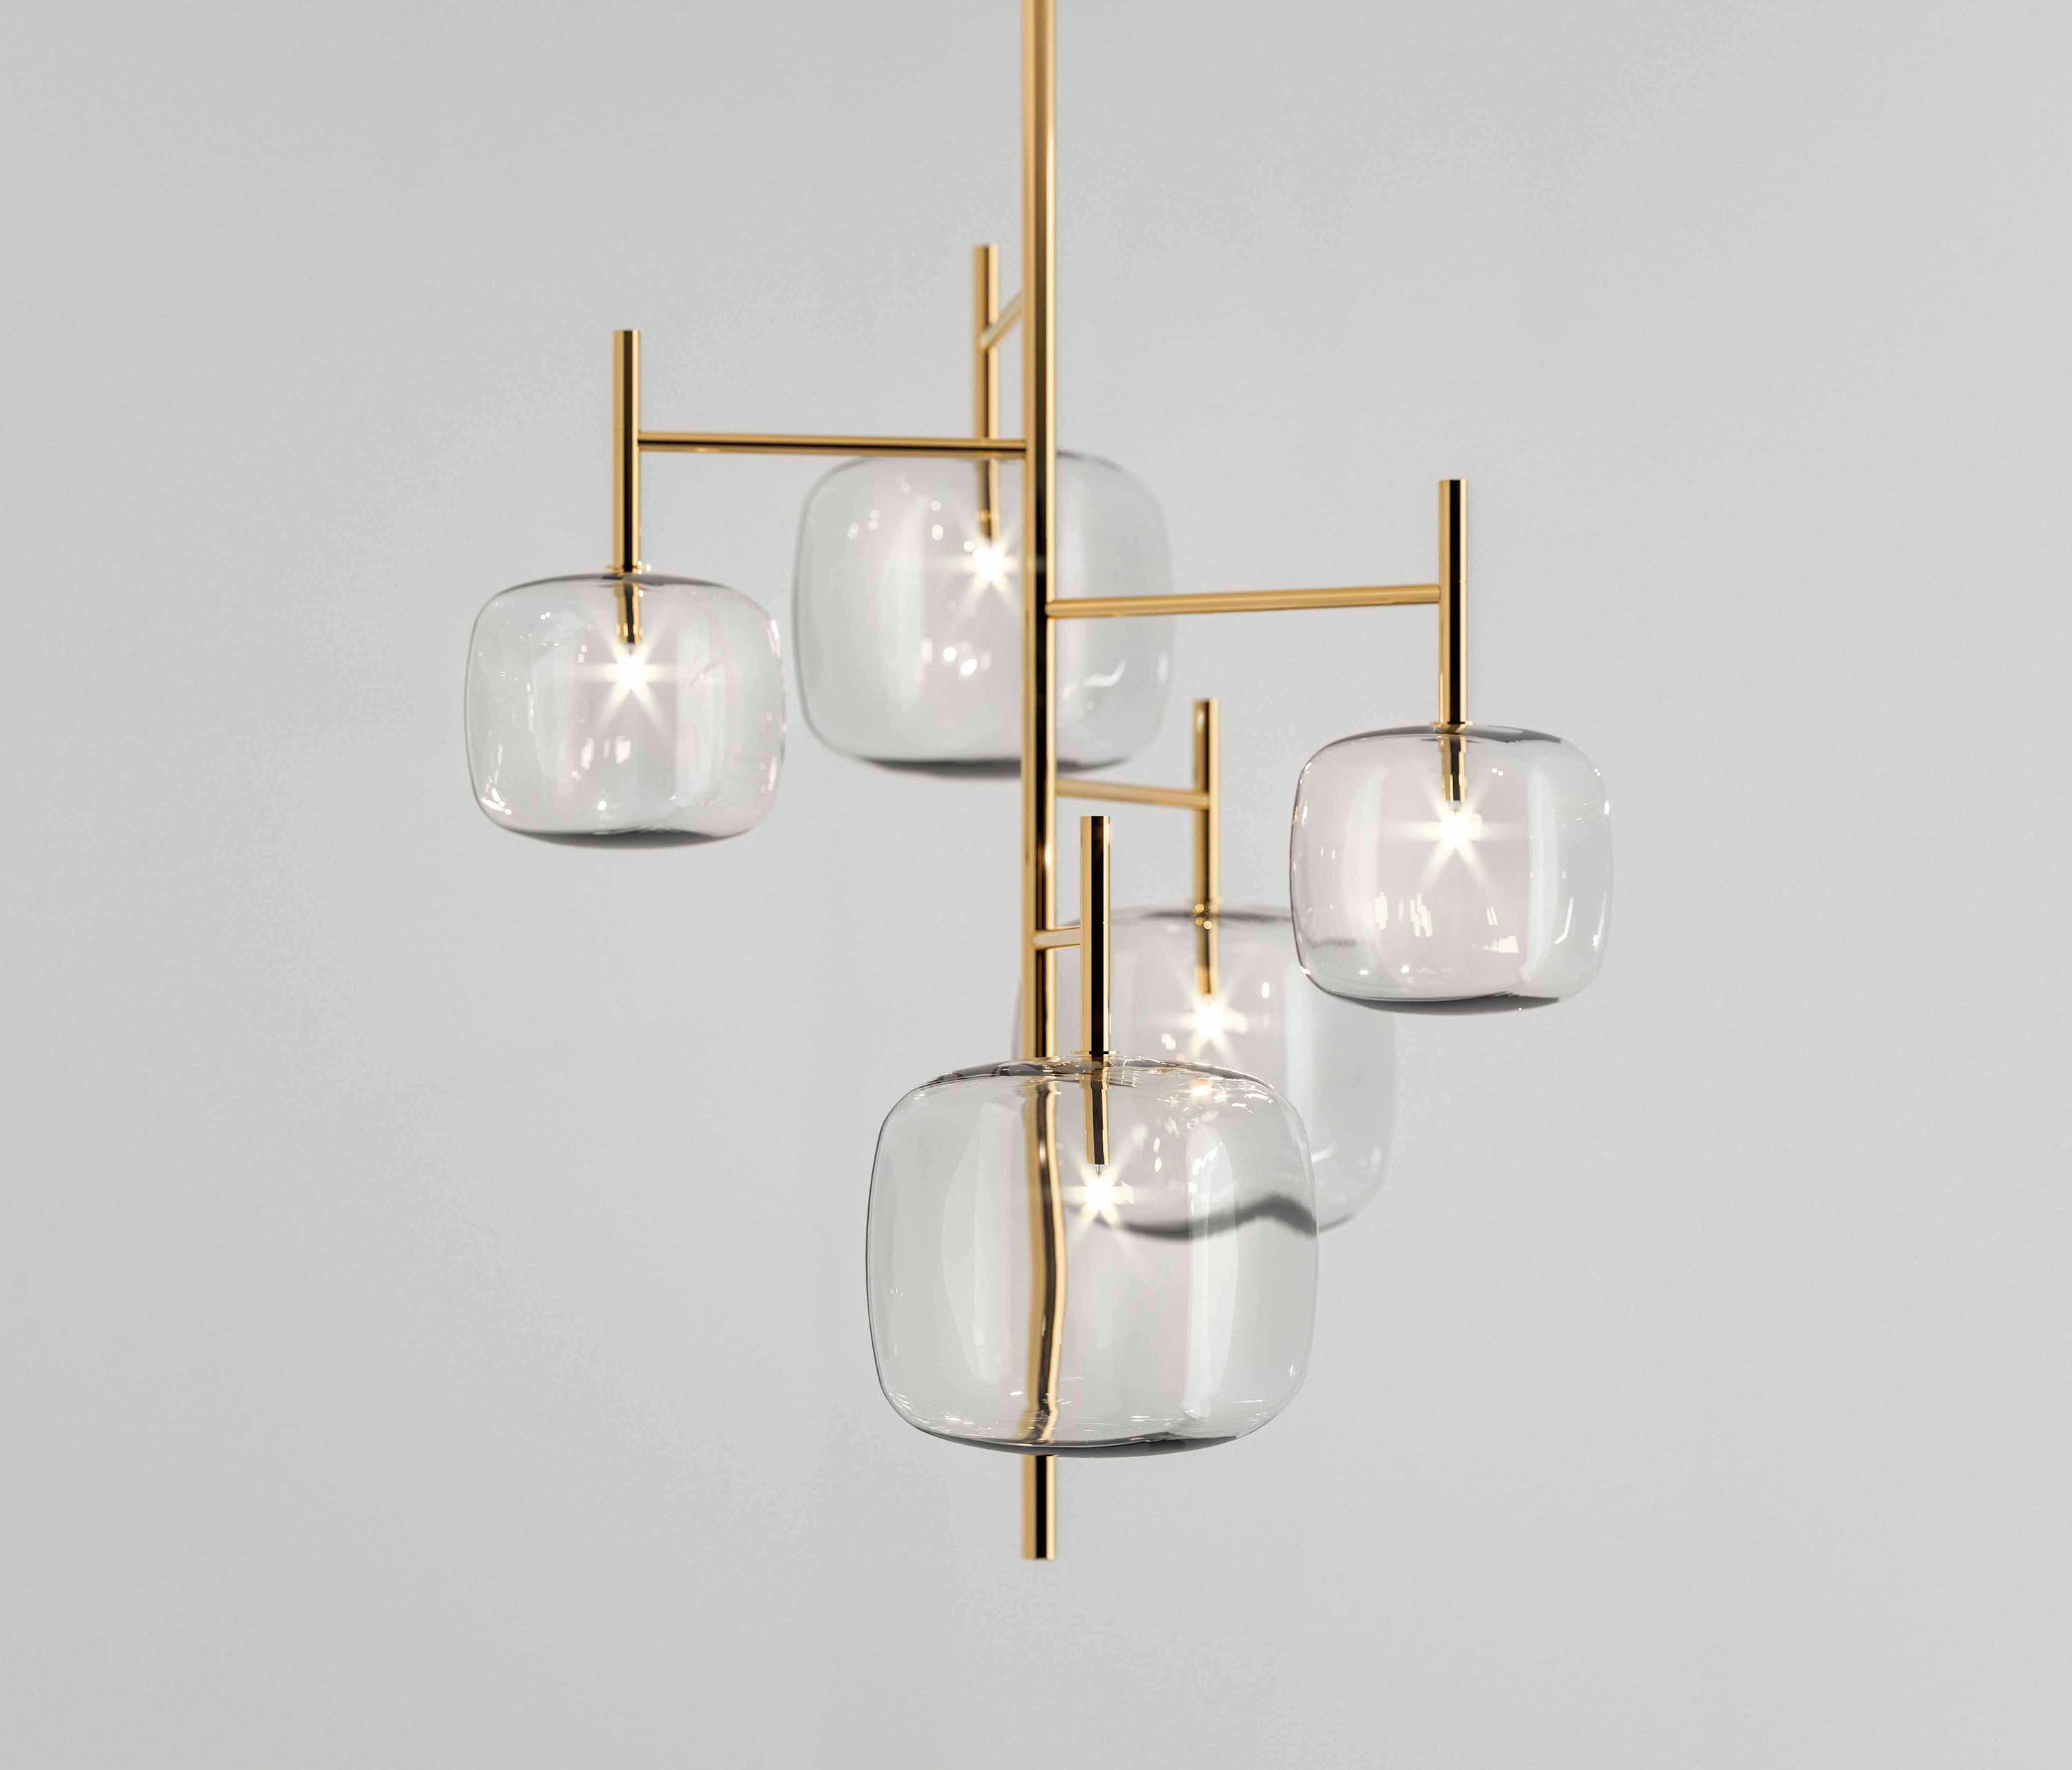 Suspended lights from Tonelli | Architonic